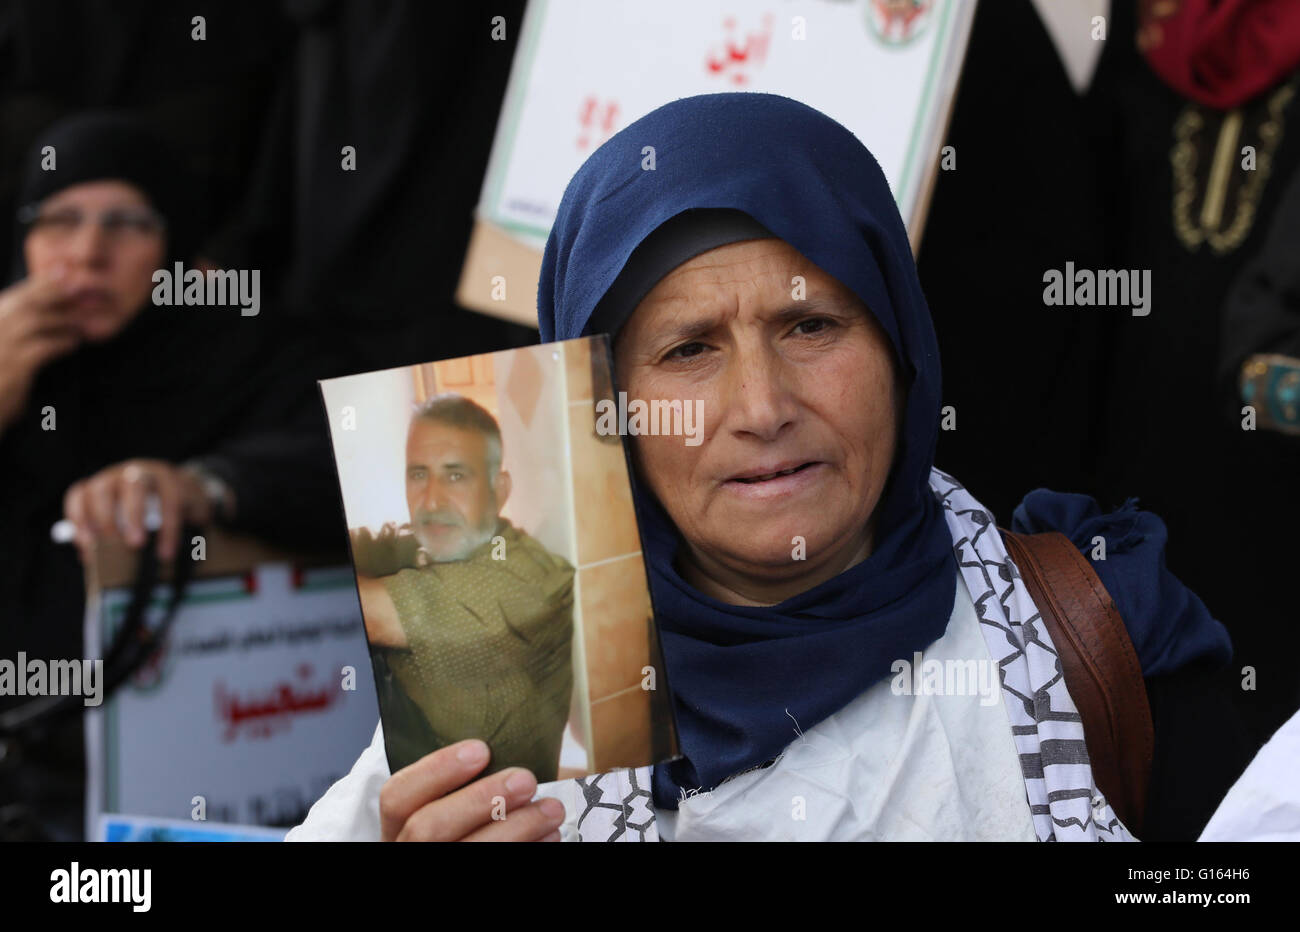 Gaza City, Gaza Strip, Palestinian Territory. 10th May, 2016. Palestinian families of martyrs, hold banners during a protest to demand their salaries, in Gaza city, on May 10, 2016 Credit:  Mohammed Asad/APA Images/ZUMA Wire/Alamy Live News Stock Photo